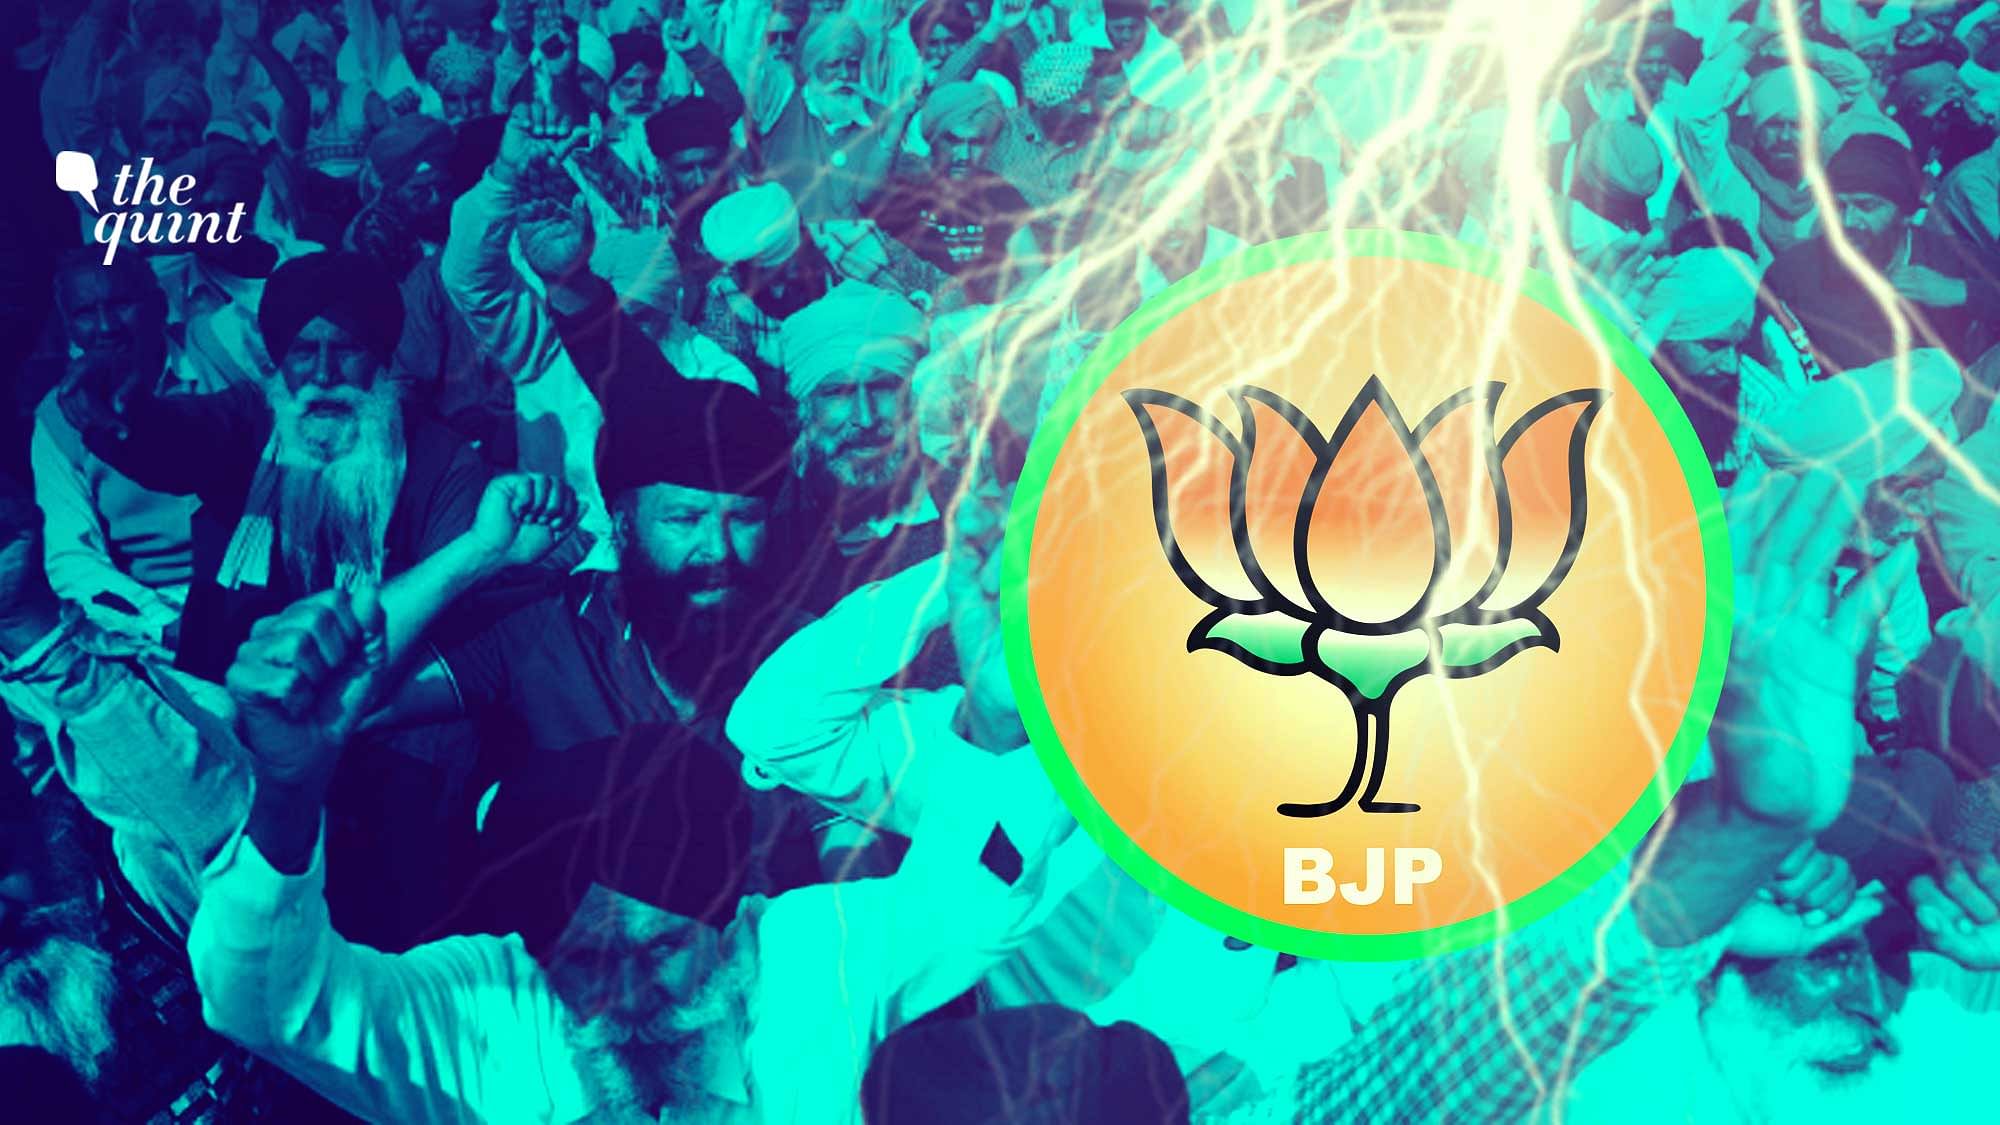 Image of BJP symbol &amp; farmers’ protests used for representational purposes.